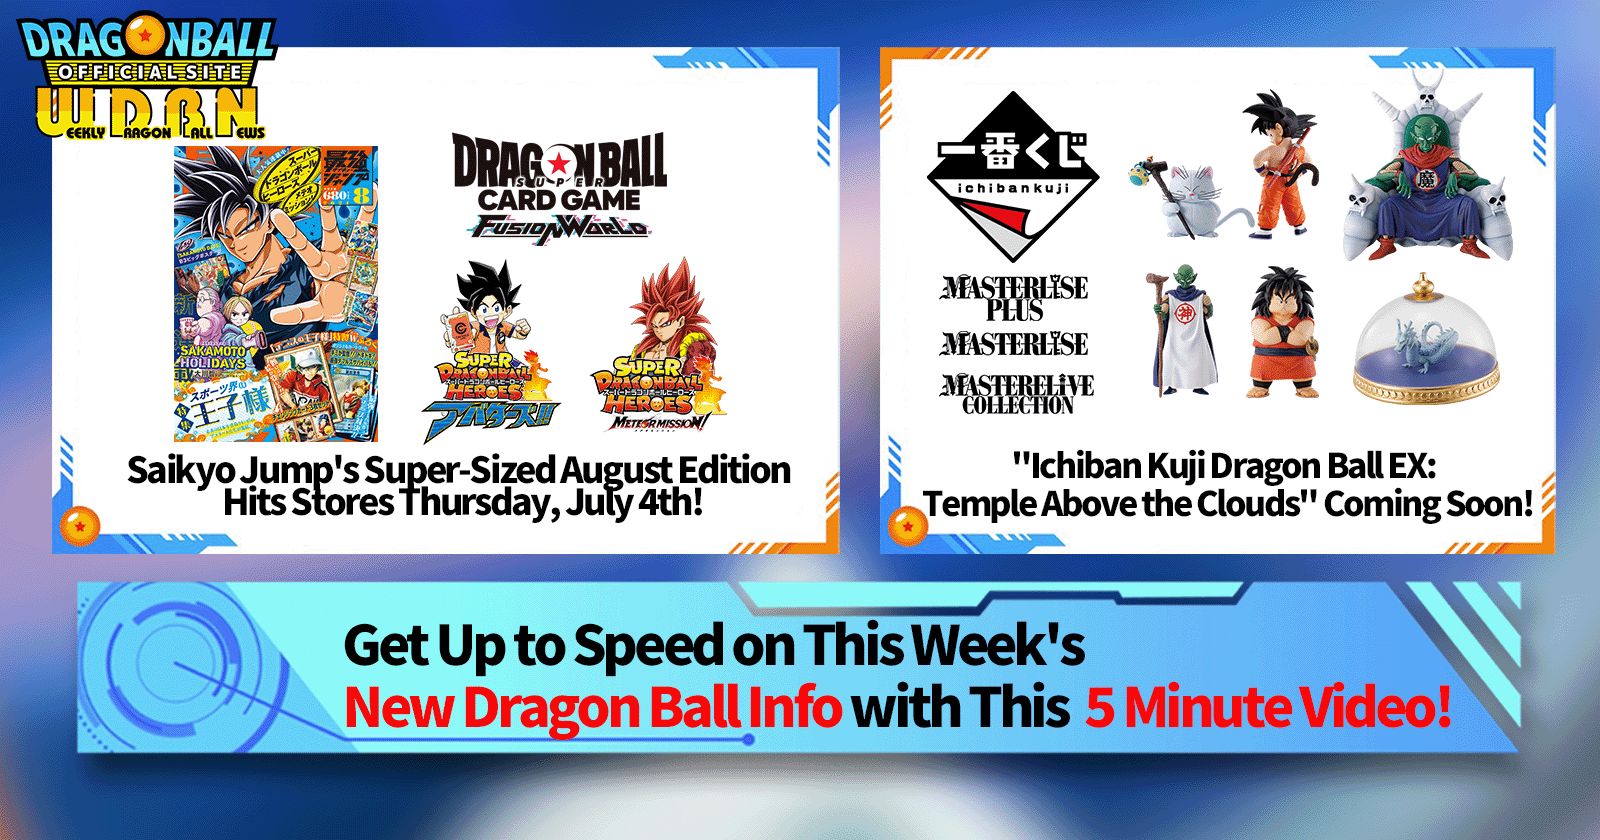 [July 1st] Weekly Dragon Ball News Broadcast!